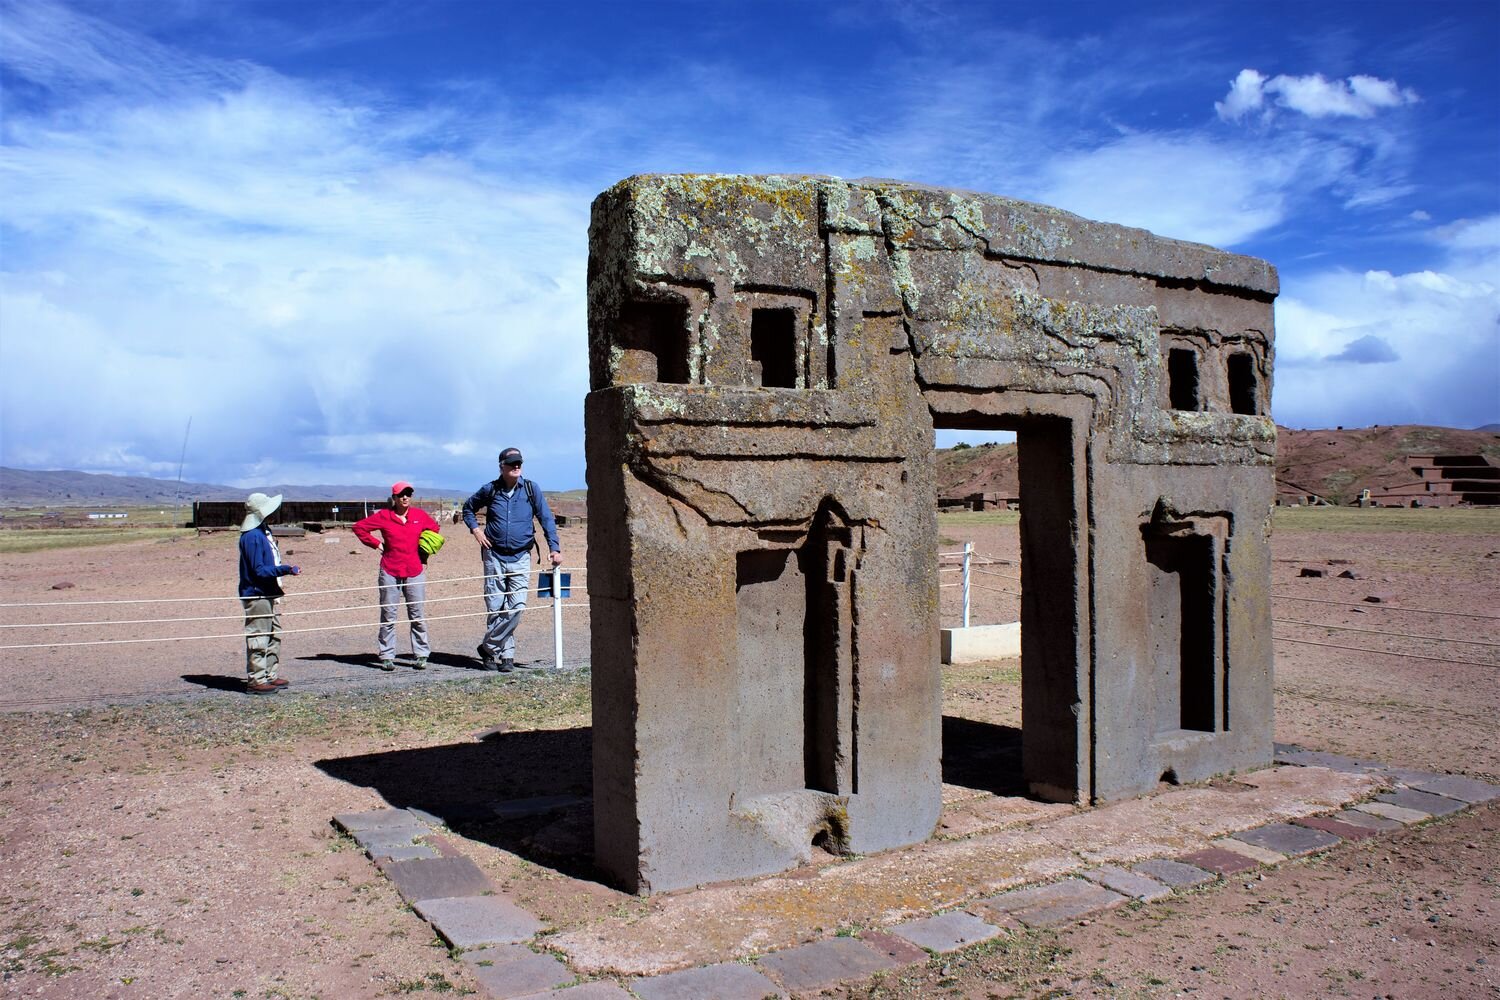  The Gate of the Sun, at Tiwanaku archaeological site. Bolivia 